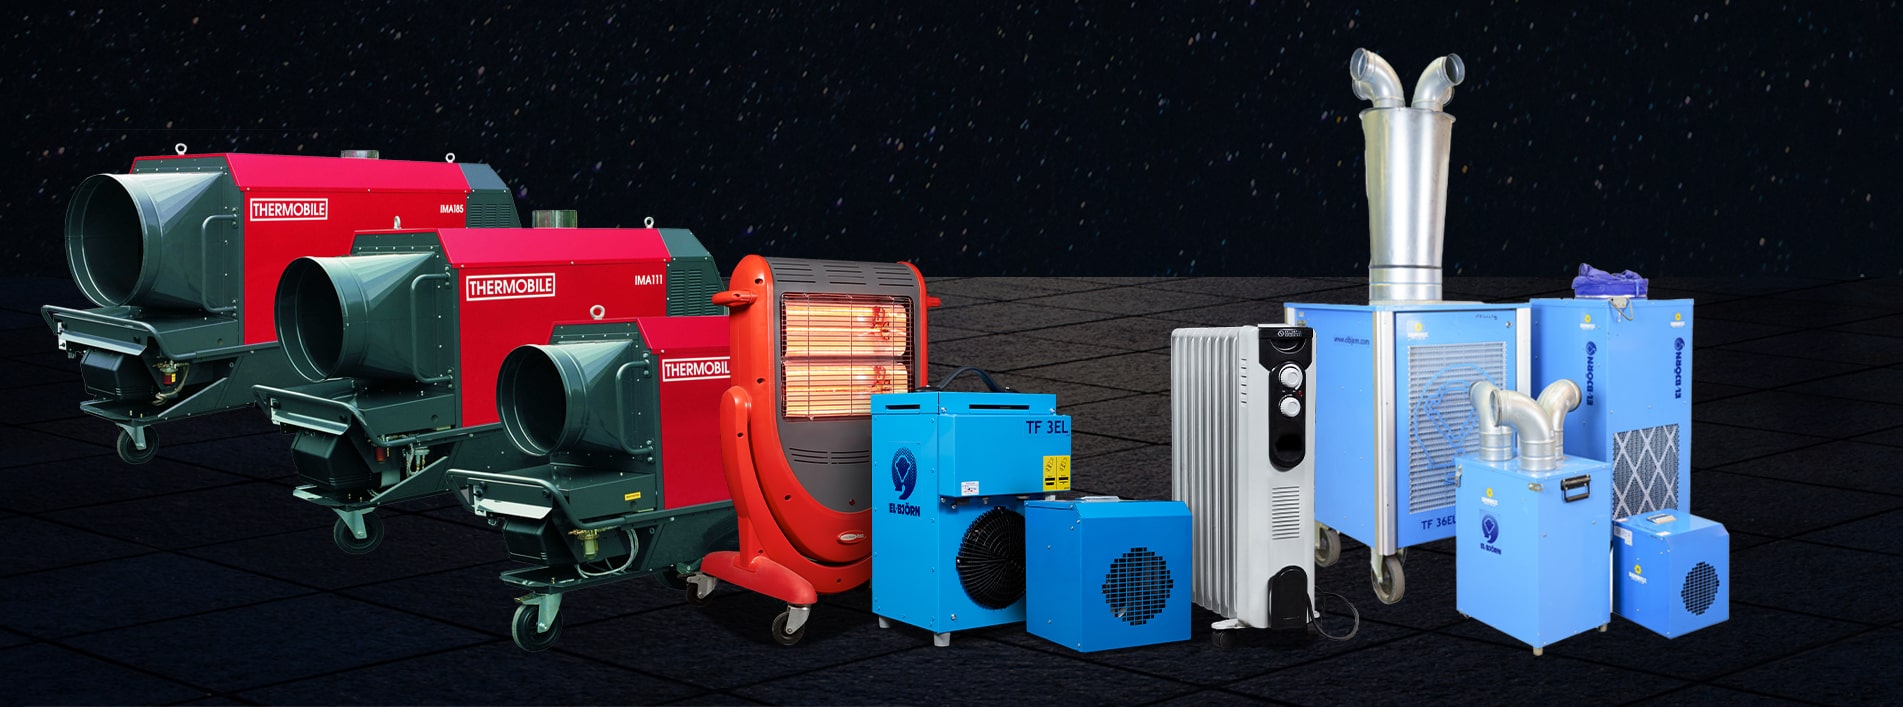 A variety of heating products from Sunbelt Rentals